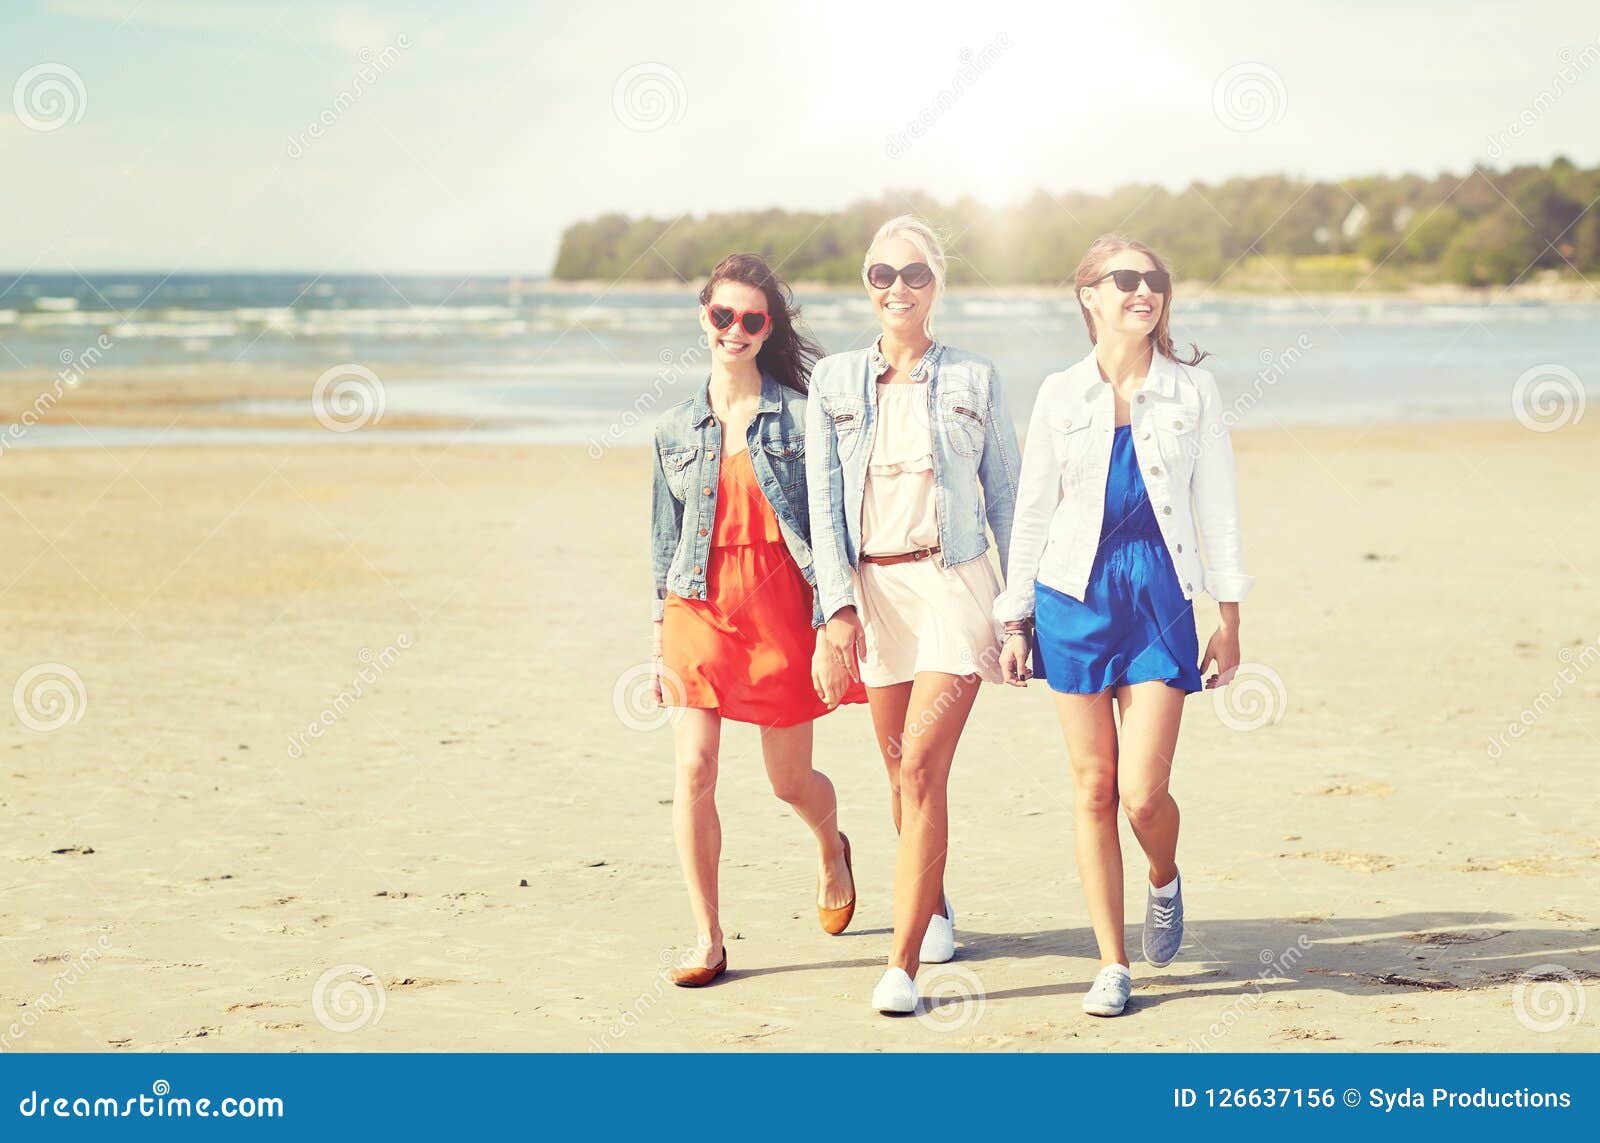 Group of Smiling Young Female Friends on Beach Stock Photo - Image of ...